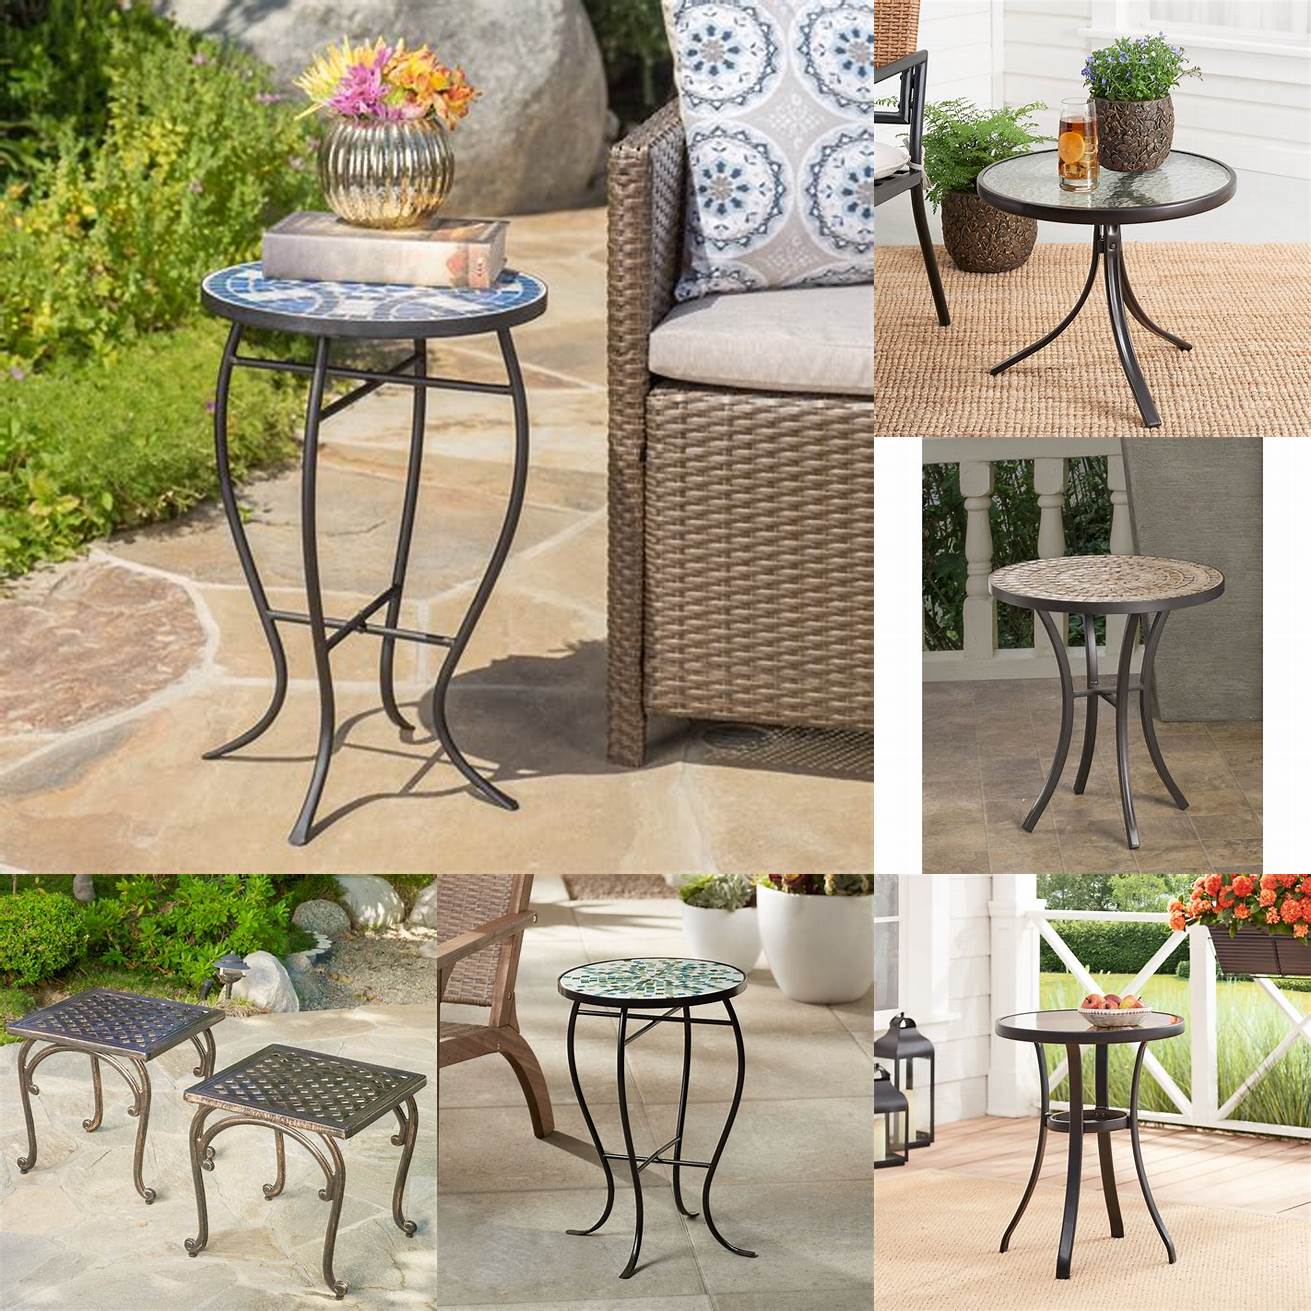 A traditional outdoor side table